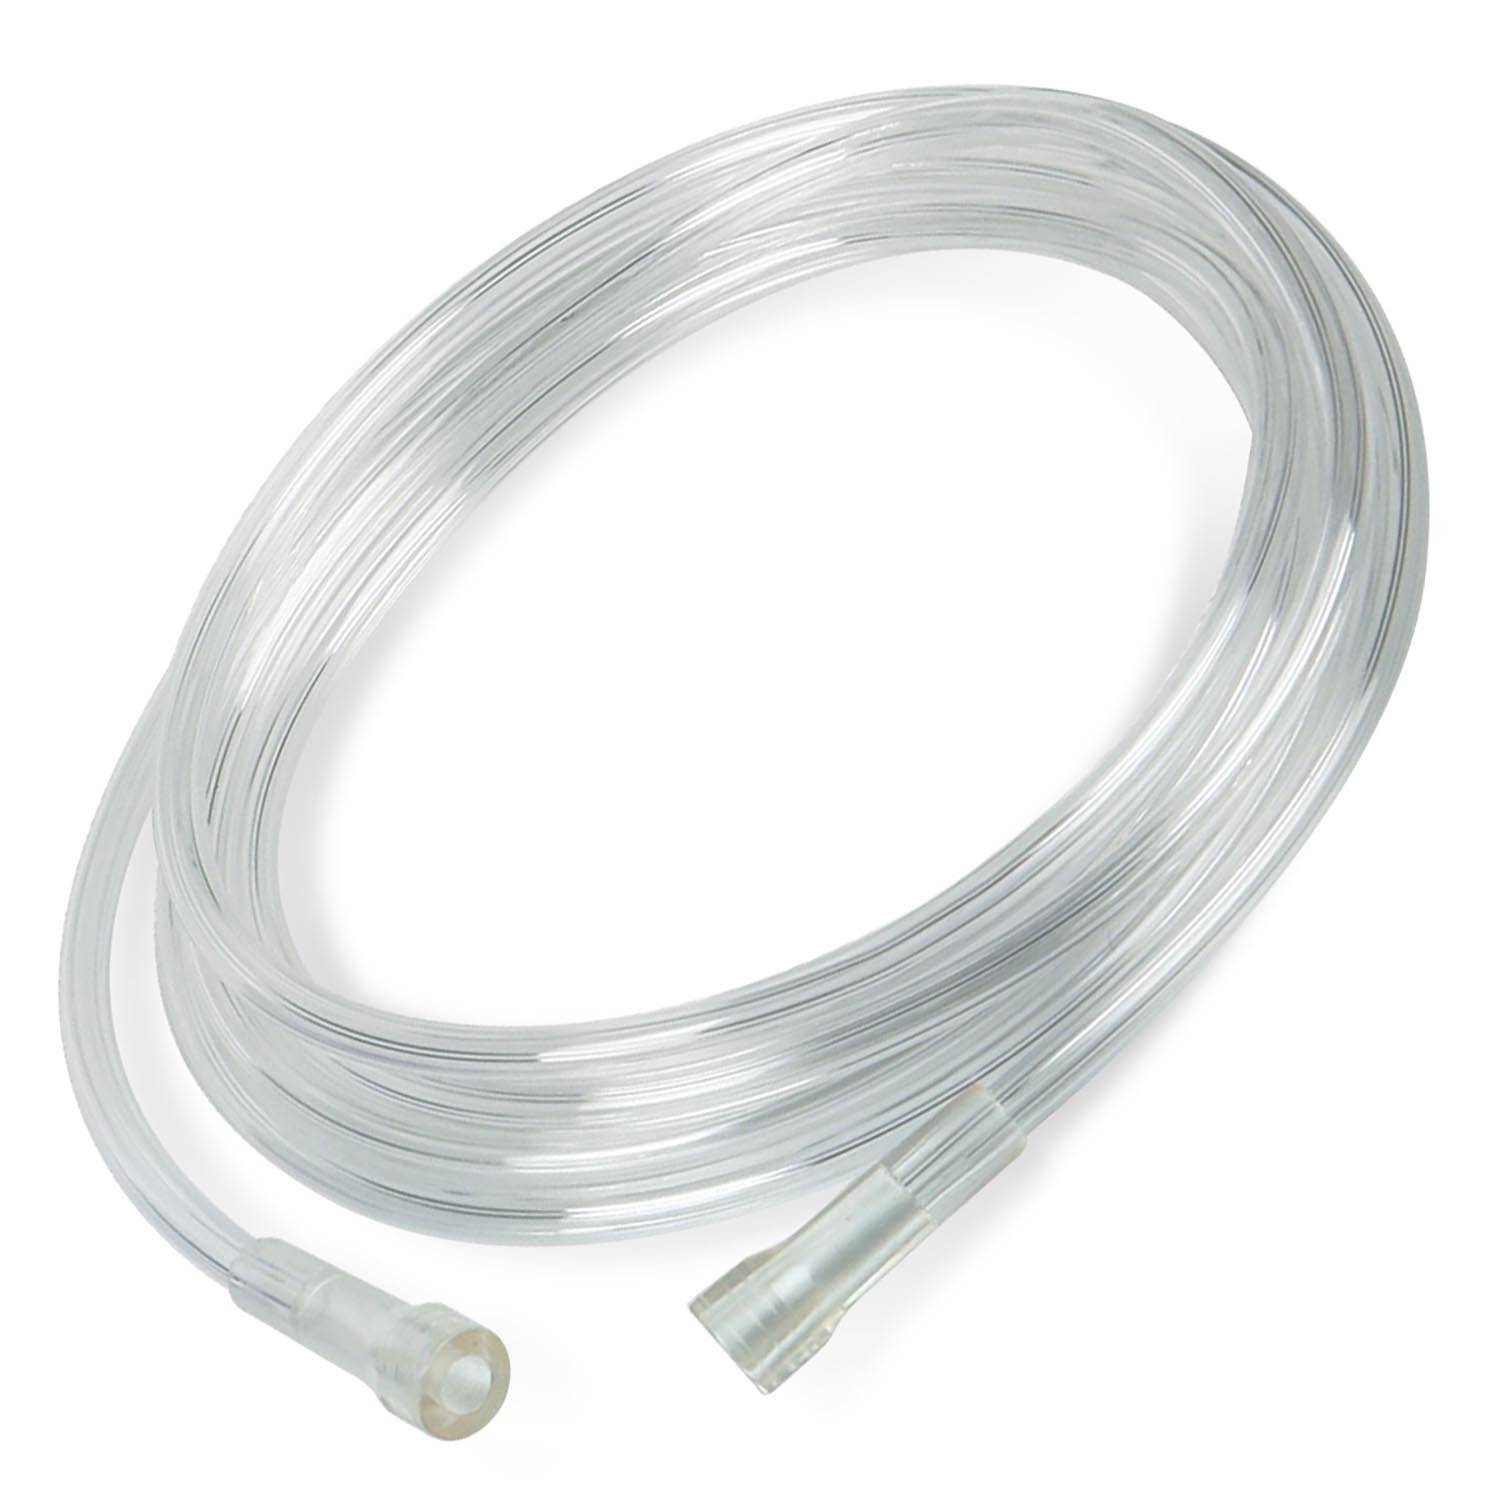 Allied Medical 7' Oxygen Supply Tubing with Soft Connector